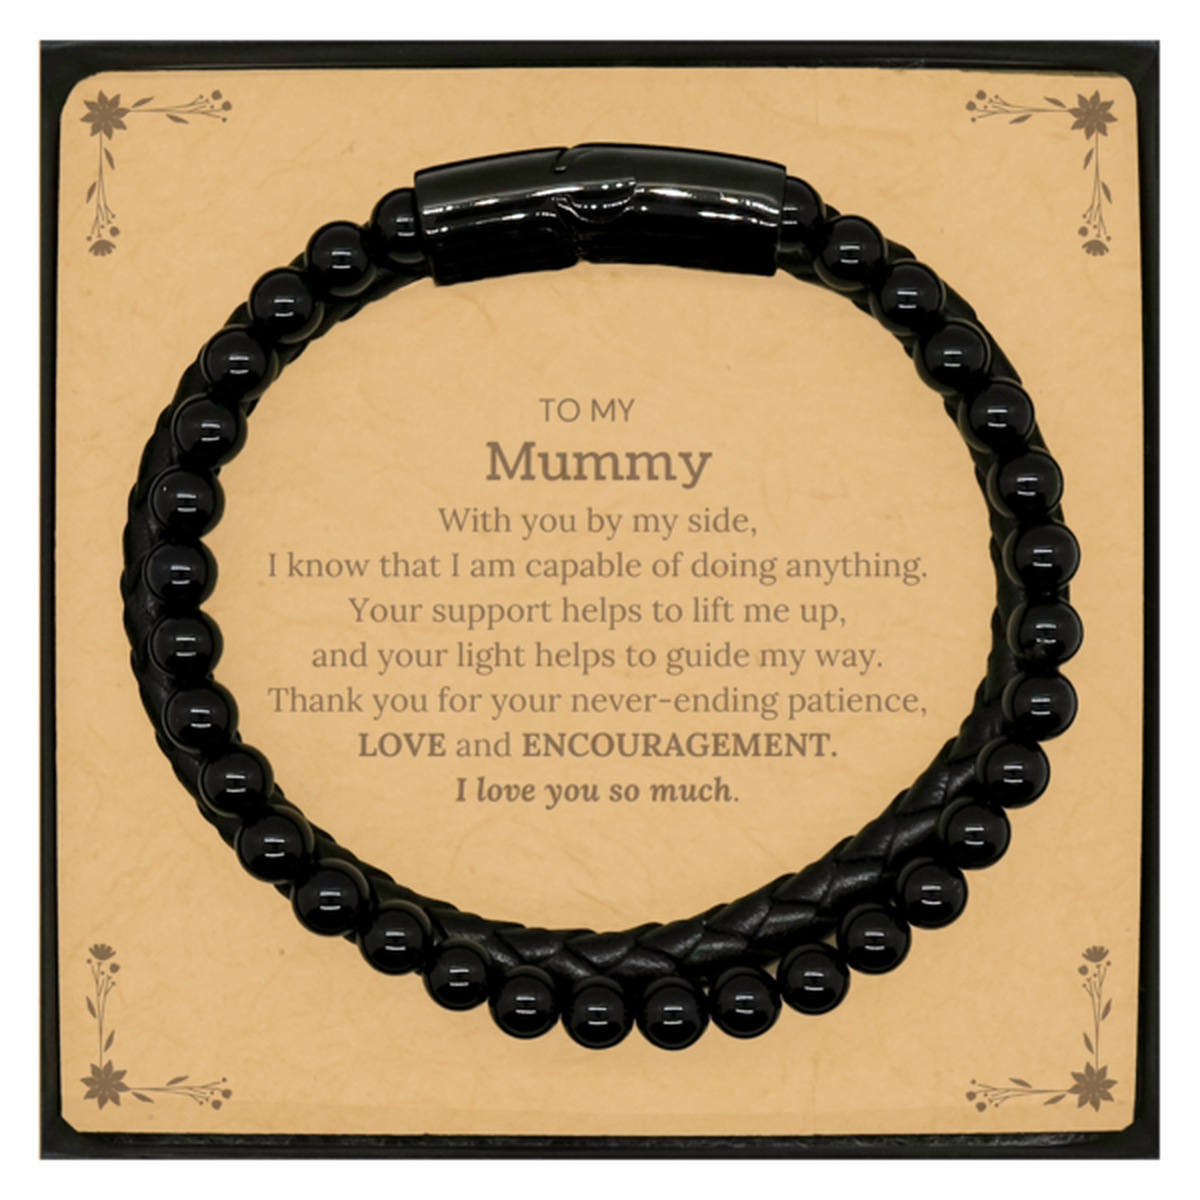 Appreciation Mummy Stone Leather Bracelets Gifts, To My Mummy Birthday Christmas Wedding Keepsake Gifts for Mummy With you by my side, I know that I am capable of doing anything. I love you so much